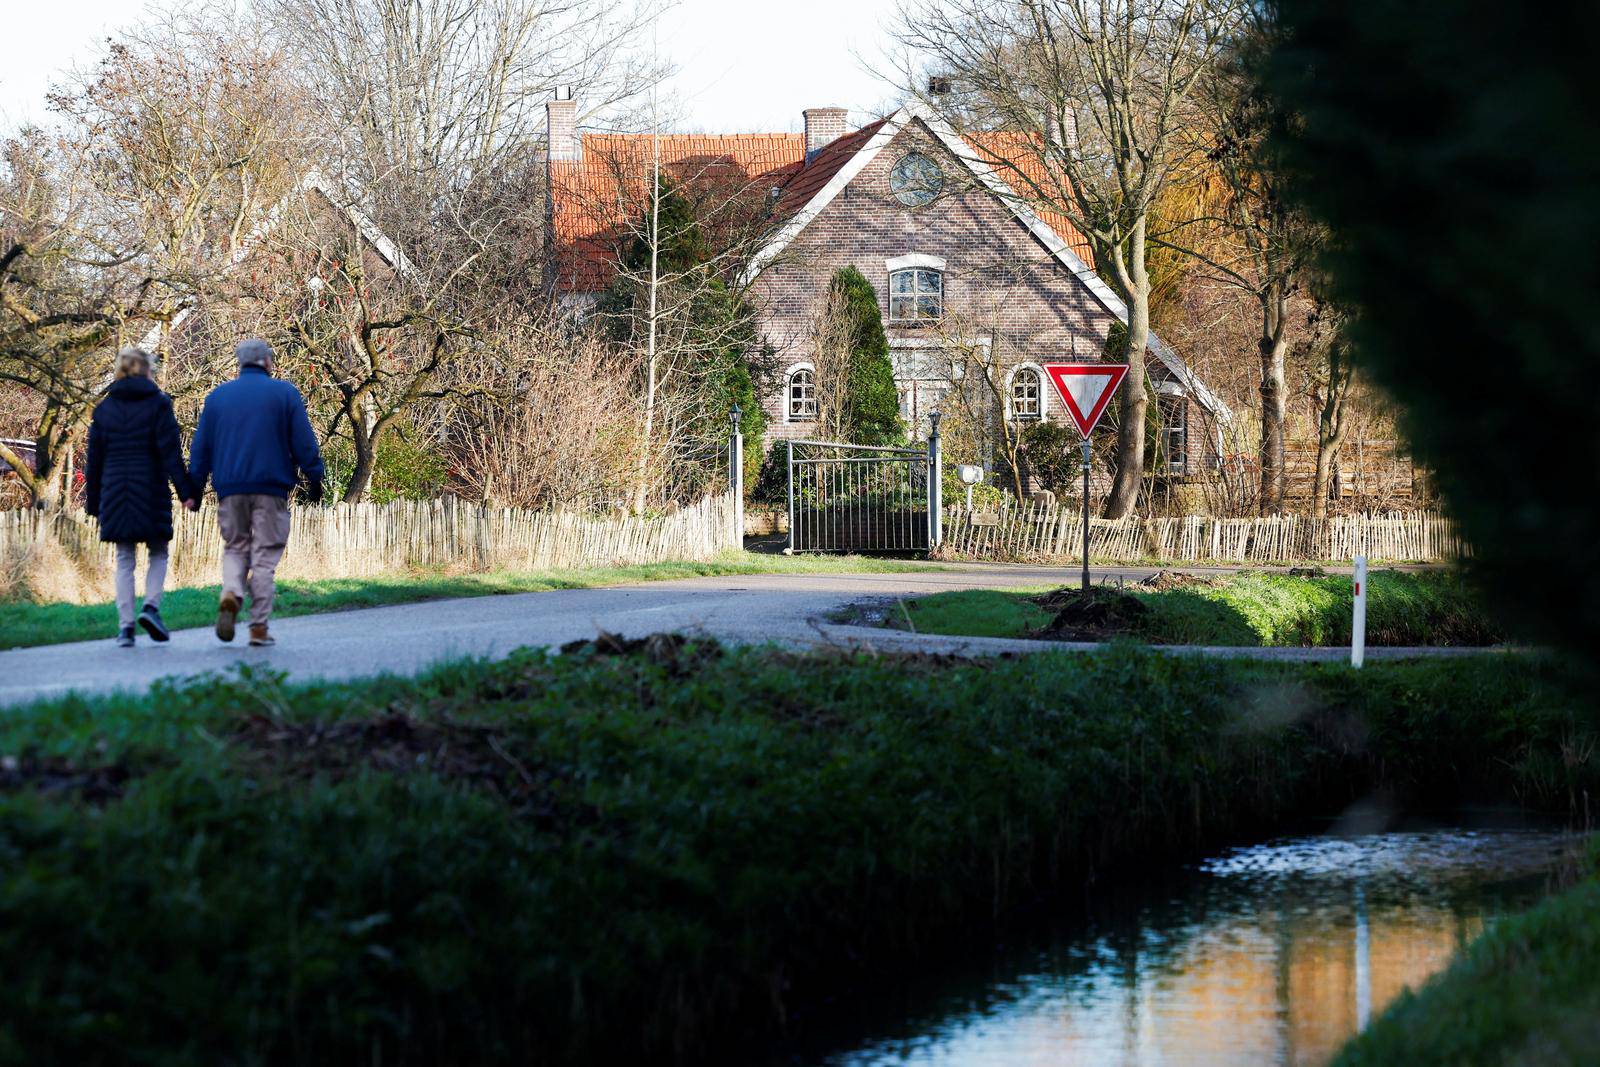 People walk on a street in the Dutch village of Ommeren